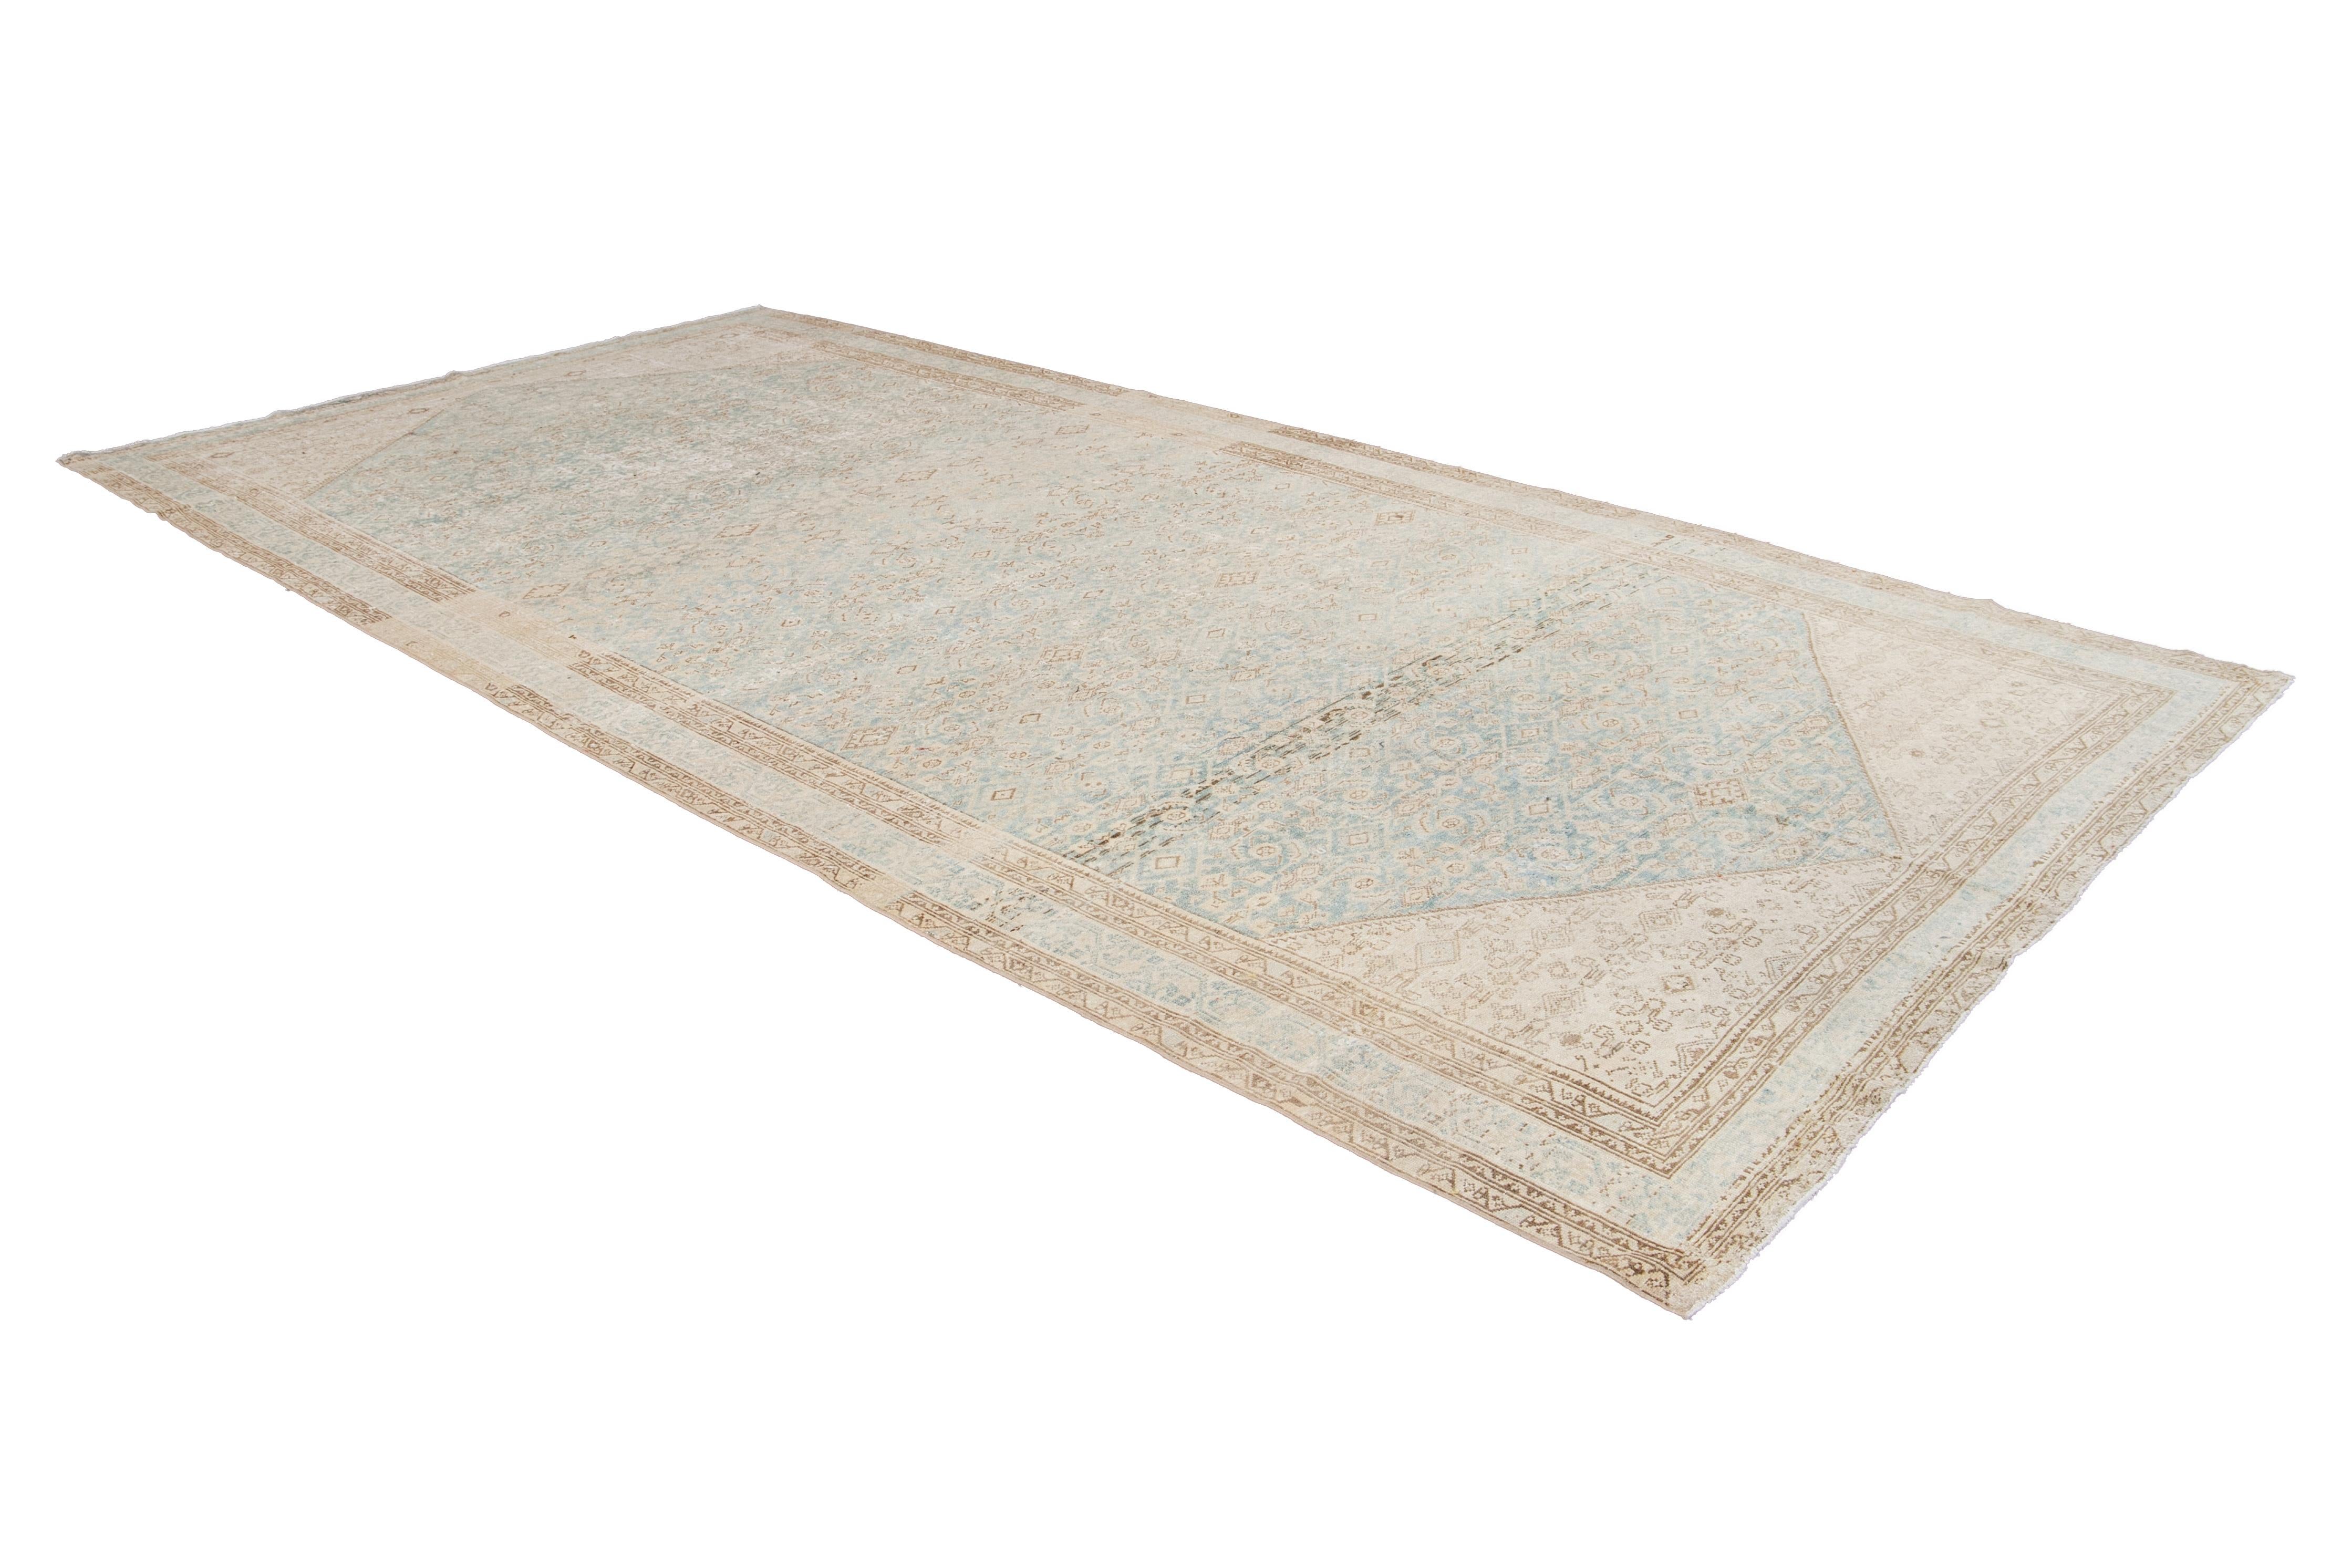 Vintage Persian Malayer with Muted Neutral Tones Wool Runner. 7'5